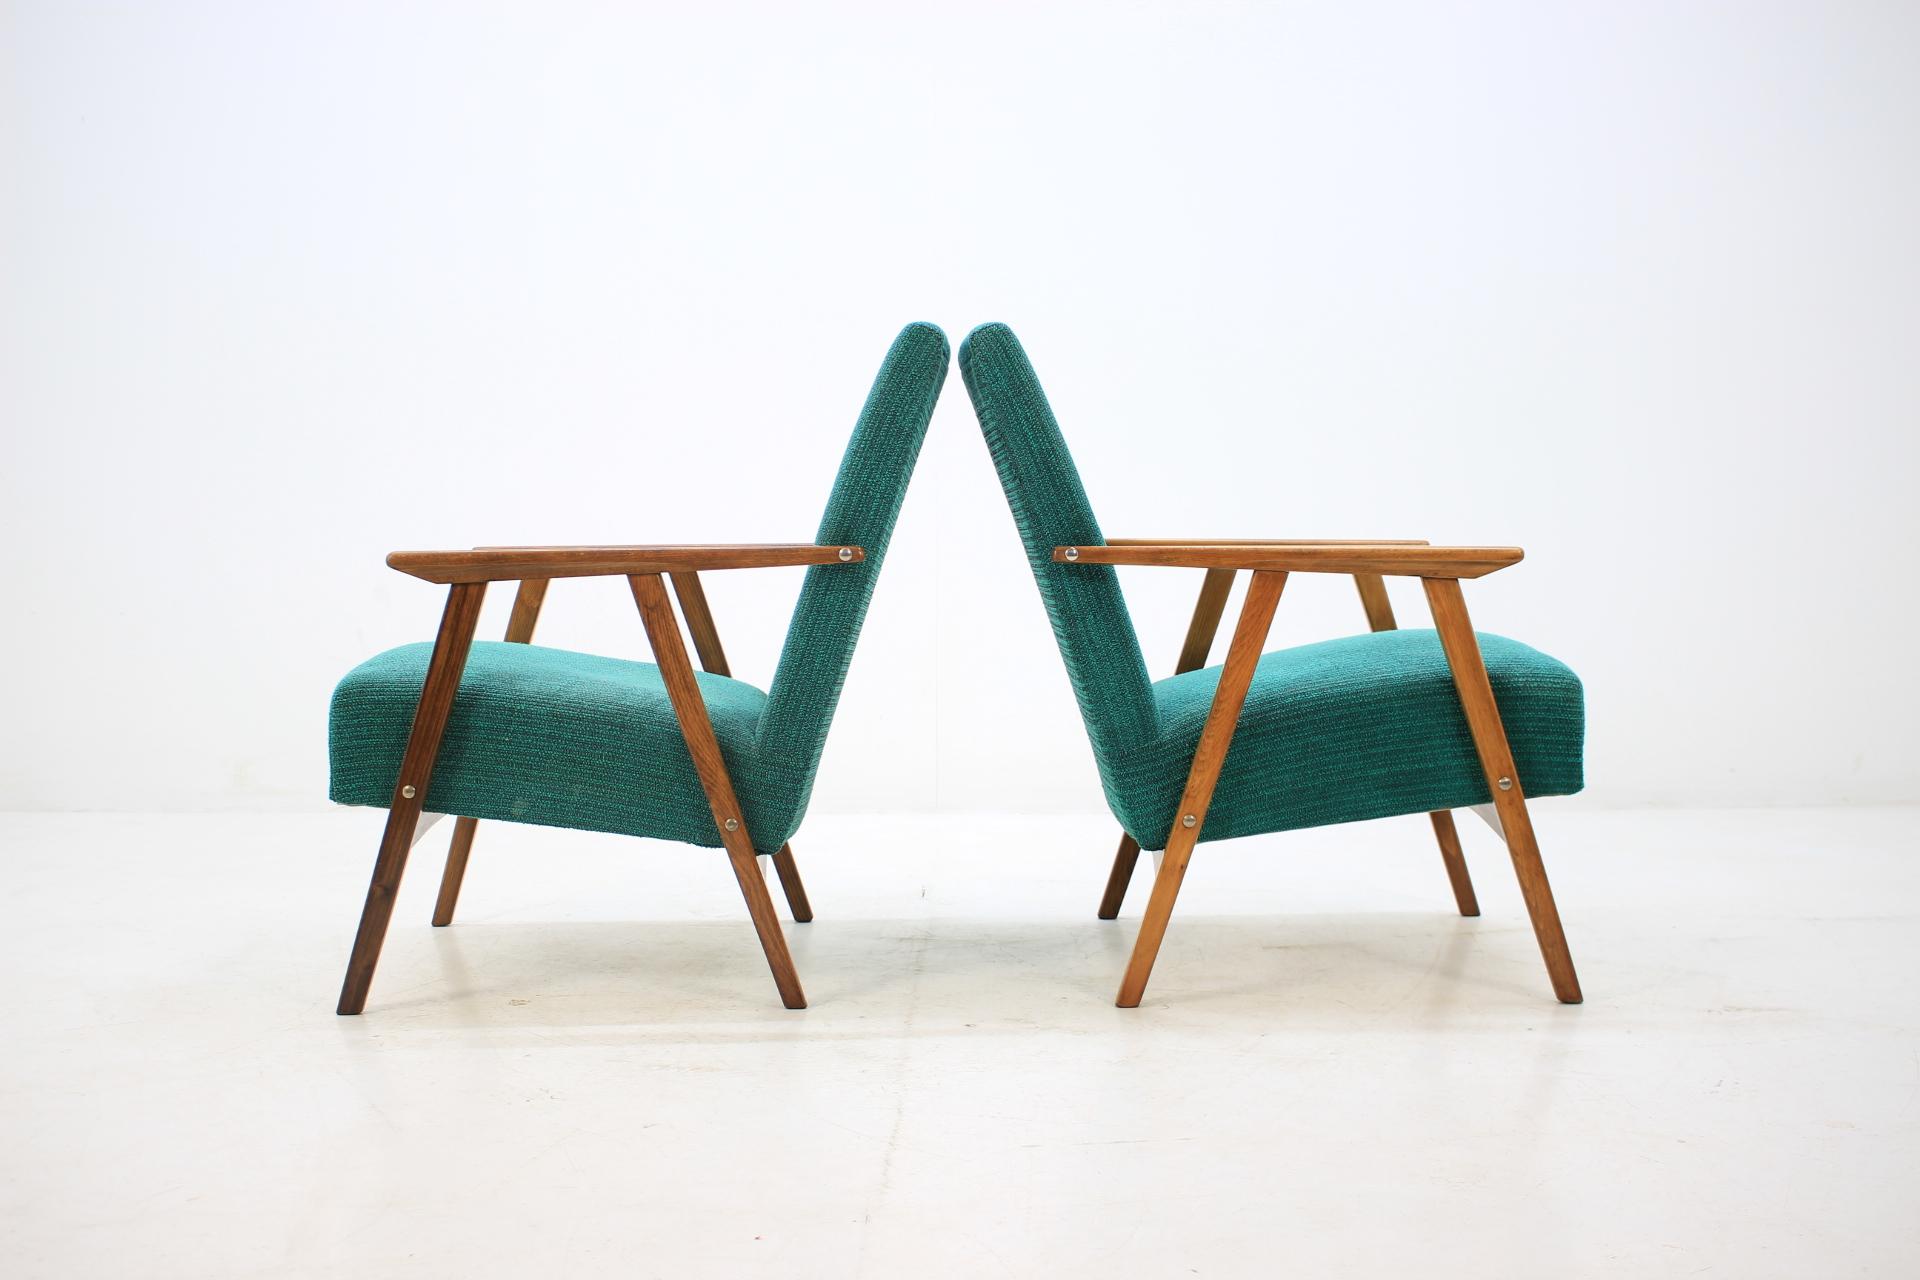 - Made of oak wood 
 - Original upholstery 
 - Very good original condition 
 - Made in Czechoslovakia.